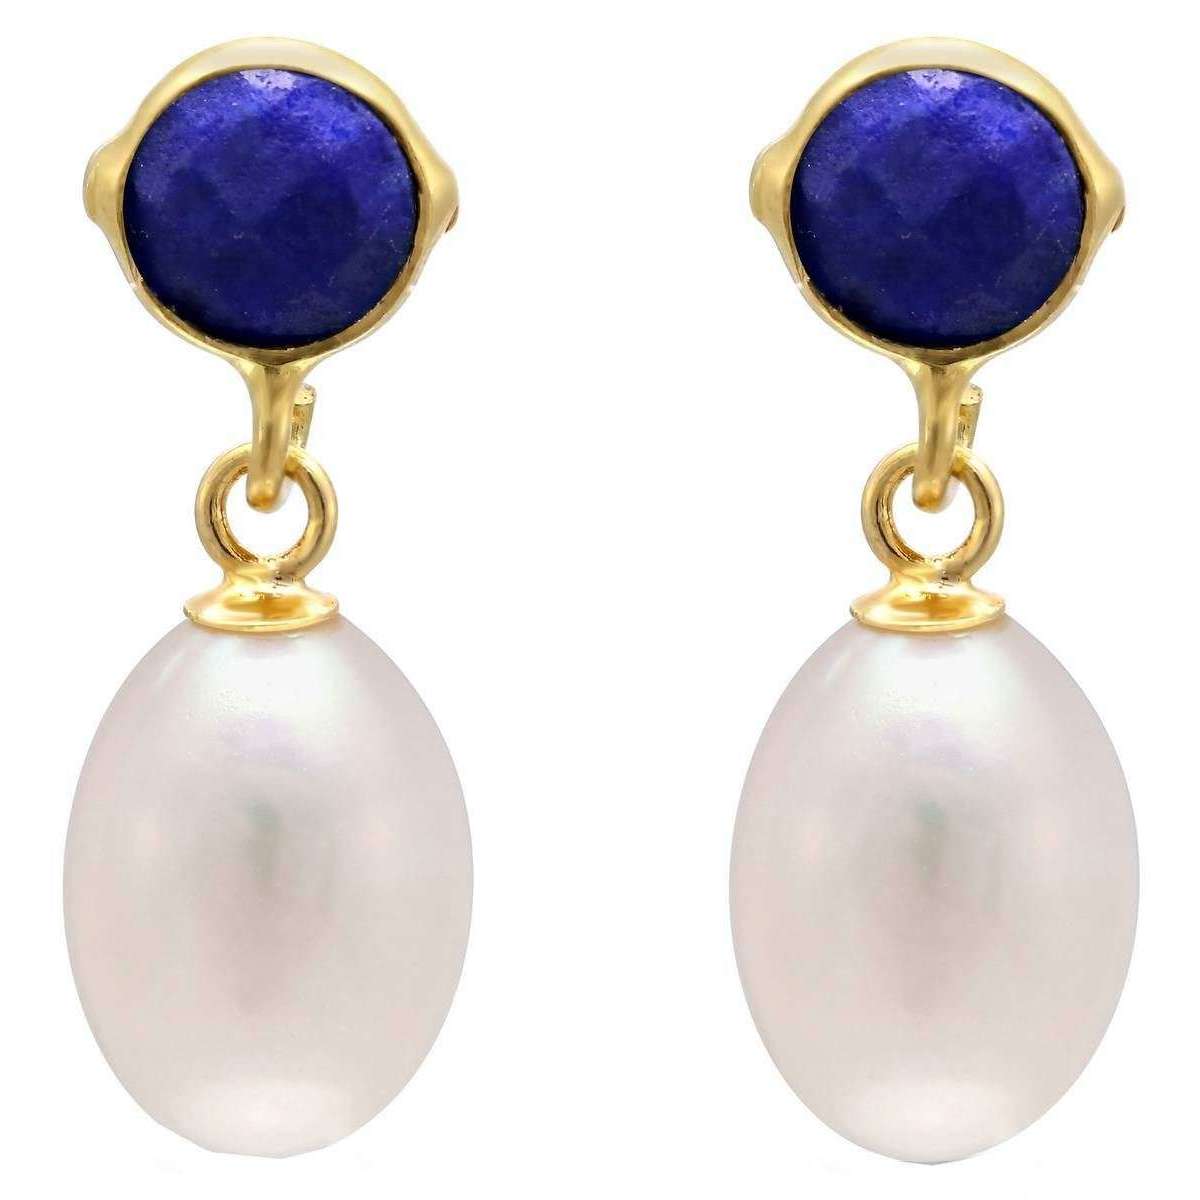 Pearls of the Orient Clara Freshwater Pearl Lapis Lazuli Drop Earrings - White/Blue